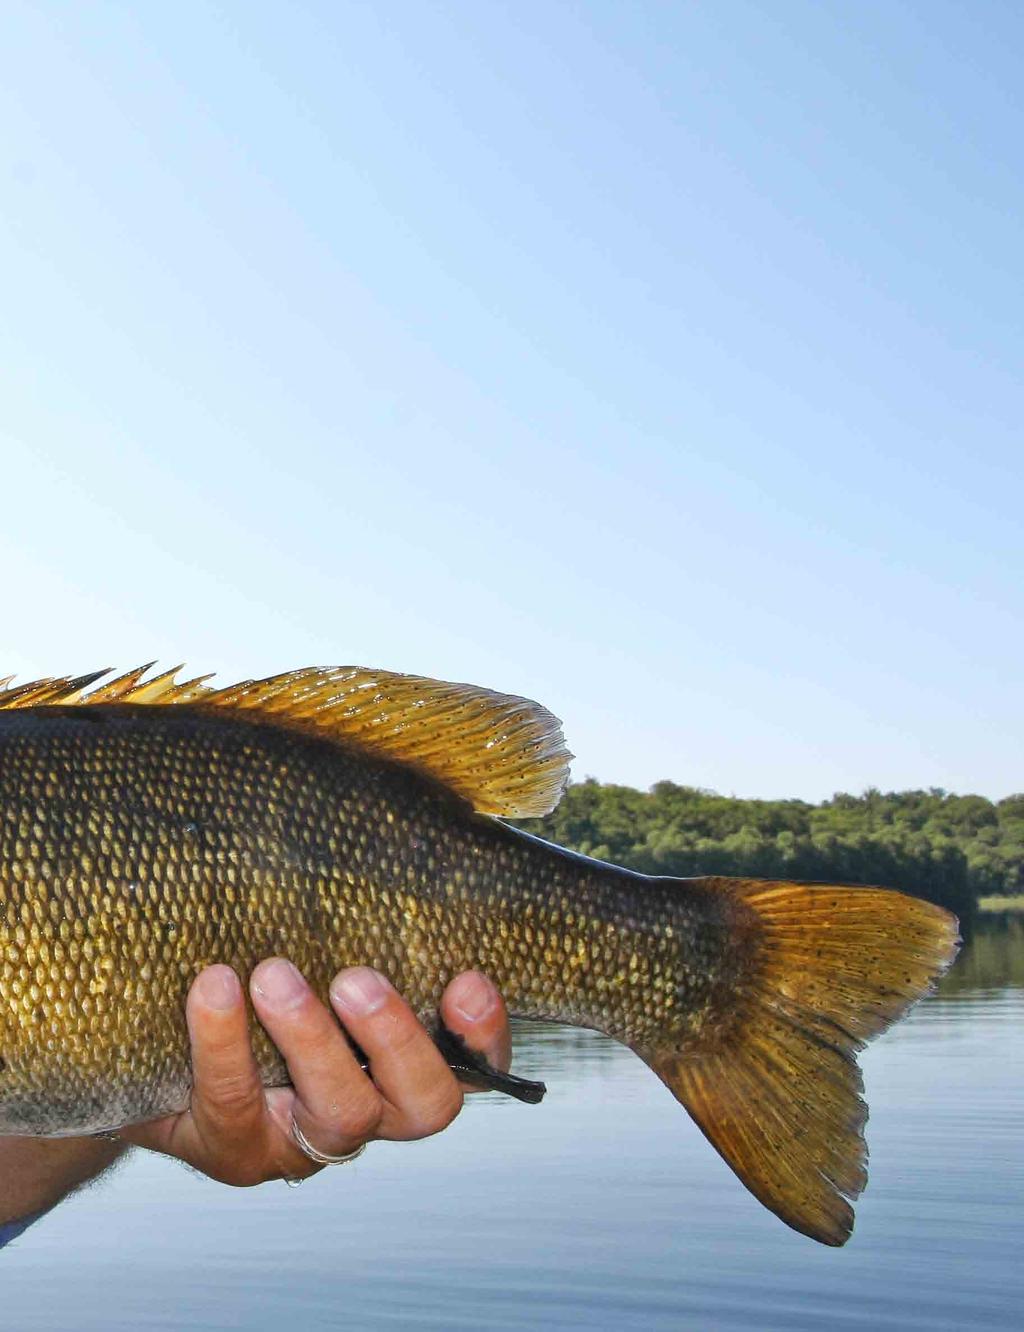 { Techniques for Big Smallmouth and Walleye } Bass take poppers because they imitate many of the creatures bass eat anything from small frogs to insects, anything that moves and seems to be trying to